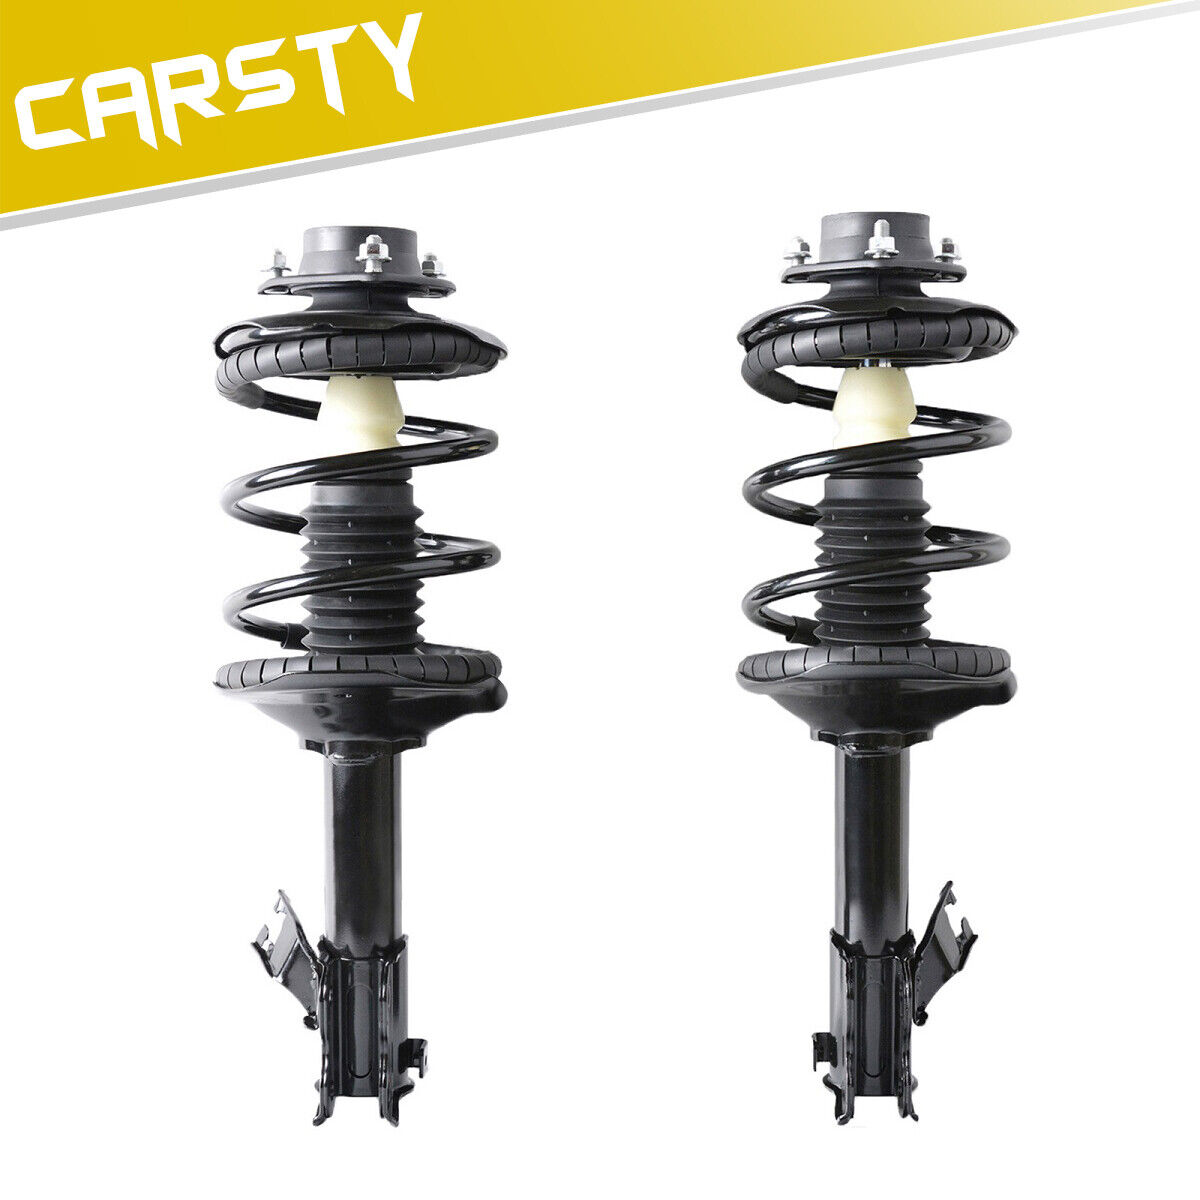 CARSTY Front Pair L&R Complete Struts Assembly for Nissan Altima 2000 2001